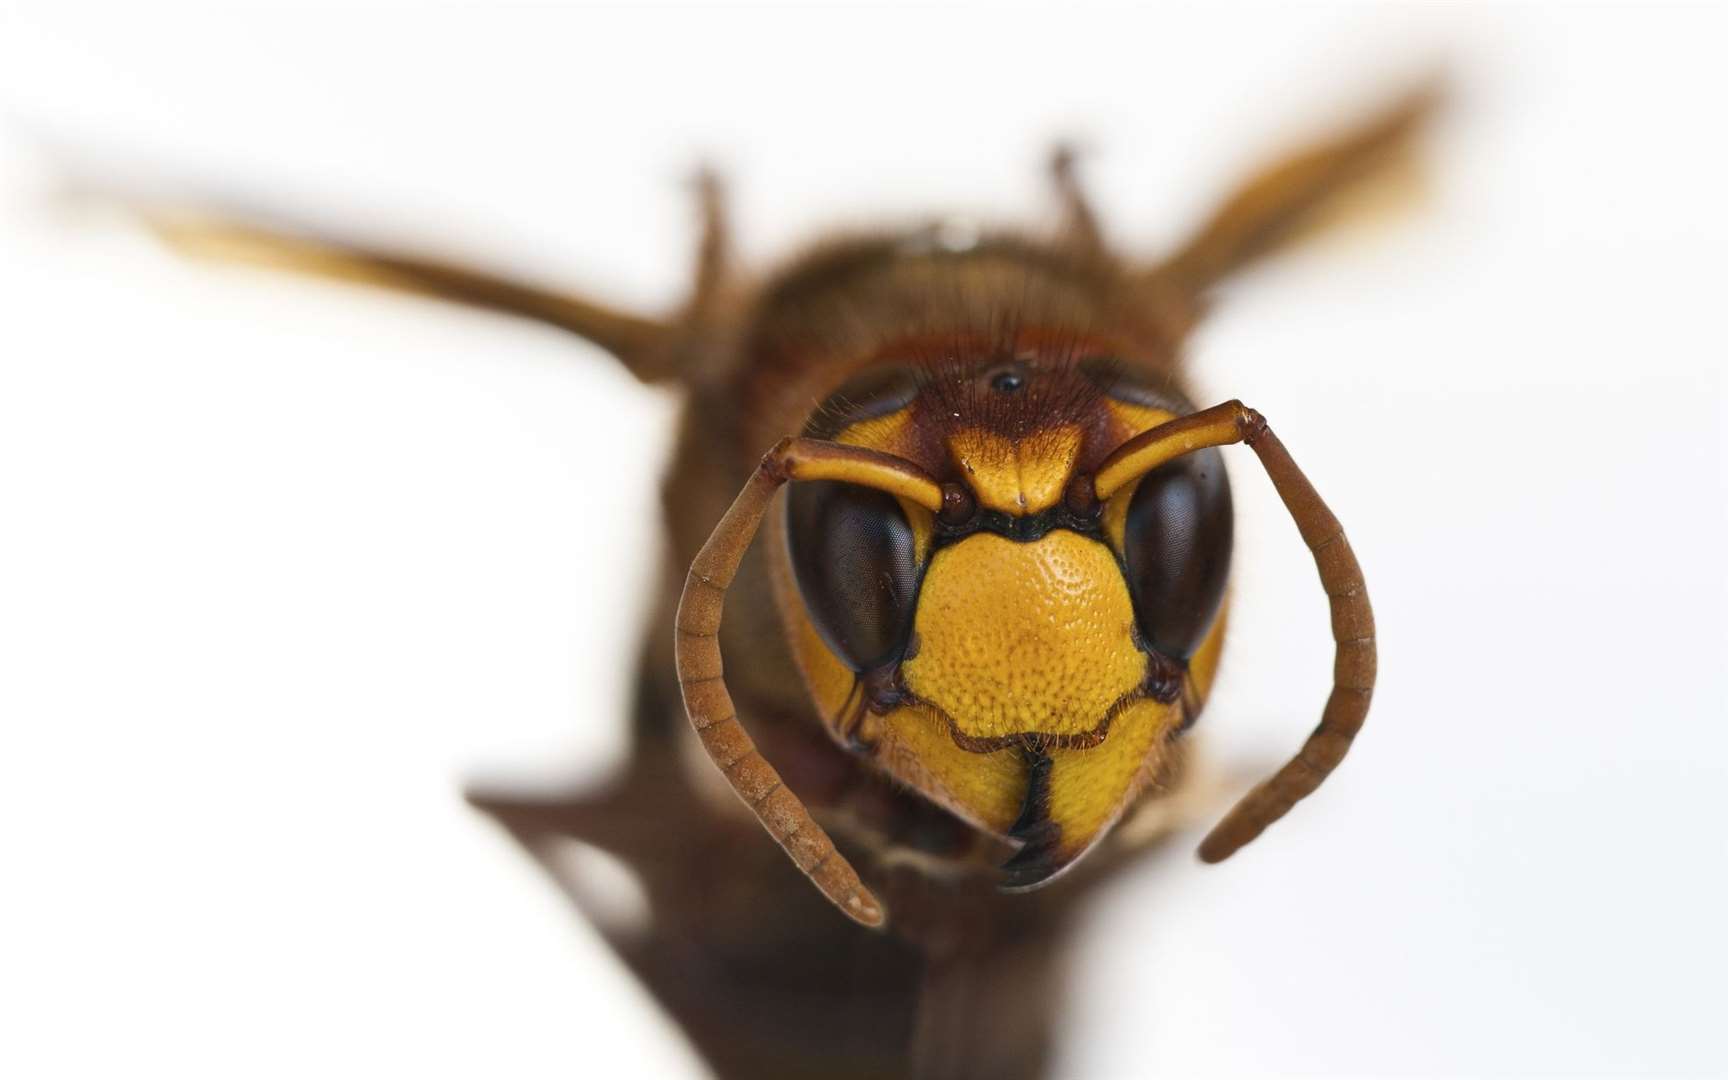 Asian hornets have already taken hold in France